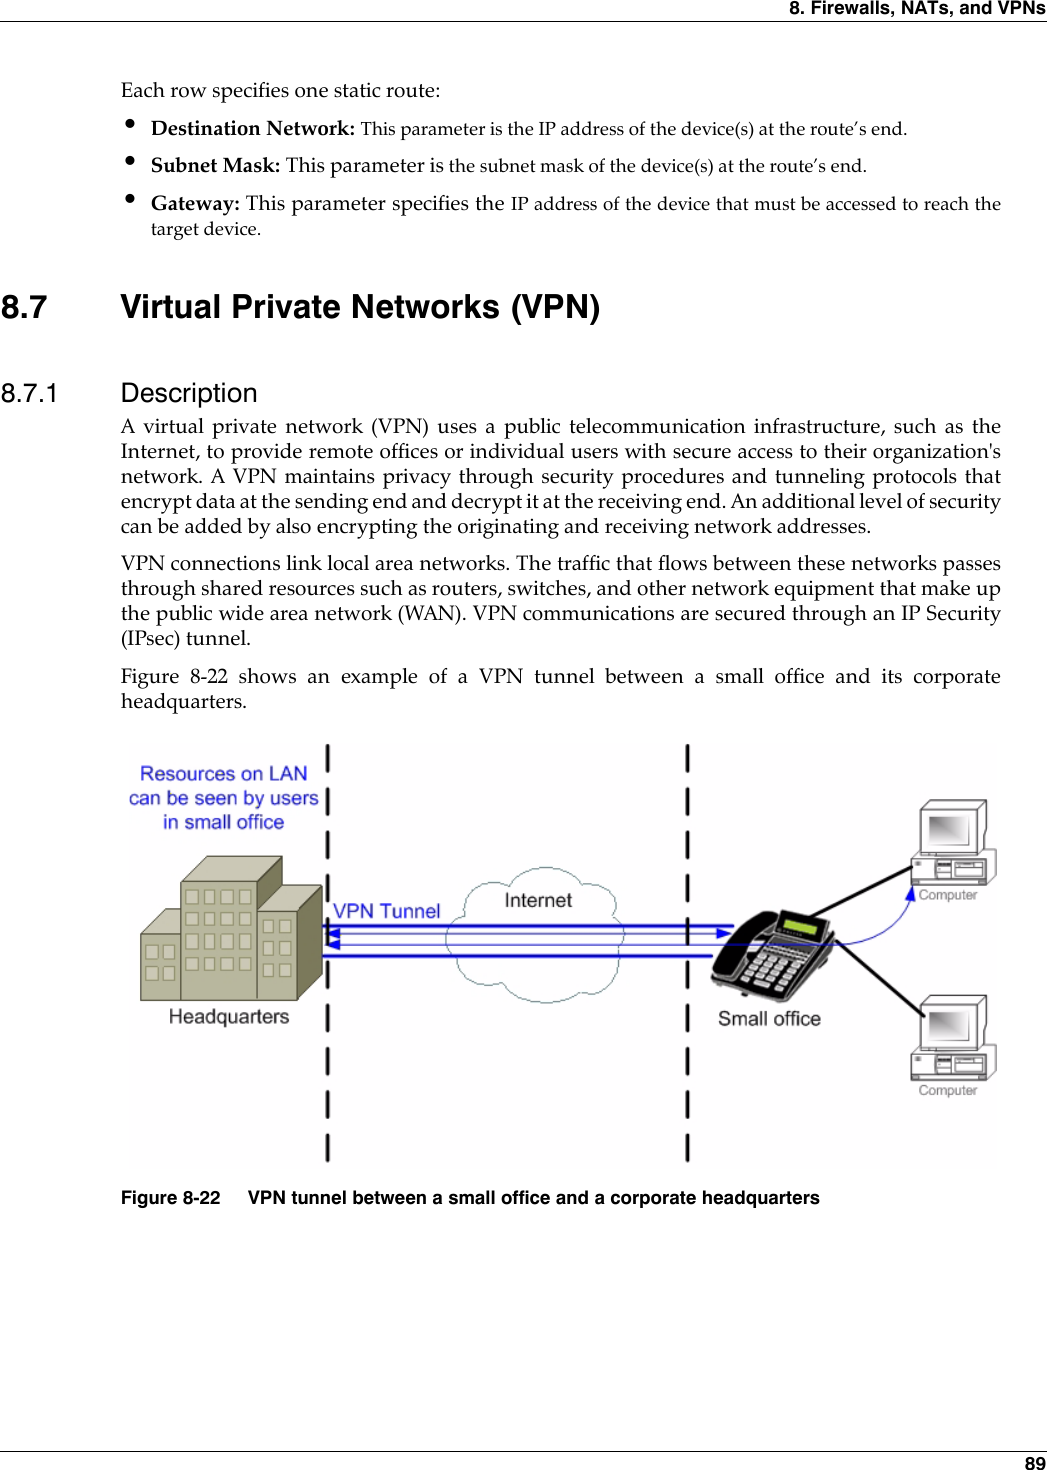 8. Firewalls, NATs, and VPNs 89Each row specifies one static route:•Destination Network: This parameter is the IP address of the device(s) at the route’s end.•Subnet Mask: This parameter is the subnet mask of the device(s) at the route’s end.•Gateway: This parameter specifies the IP address of the device that must be accessed to reach thetarget device.8.7 Virtual Private Networks (VPN)8.7.1 DescriptionA virtual private network (VPN) uses a public telecommunication infrastructure, such as theInternet, to provide remote offices or individual users with secure access to their organization&apos;snetwork. A VPN maintains privacy through security procedures and tunneling protocols thatencrypt data at the sending end and decrypt it at the receiving end. An additional level of securitycan be added by also encrypting the originating and receiving network addresses.VPN connections link local area networks. The traffic that flows between these networks passesthrough shared resources such as routers, switches, and other network equipment that make upthe public wide area network (WAN). VPN communications are secured through an IP Security(IPsec) tunnel.Figure 8-22 shows an example of a VPN tunnel between a small office and its corporateheadquarters.Figure 8-22 VPN tunnel between a small office and a corporate headquarters